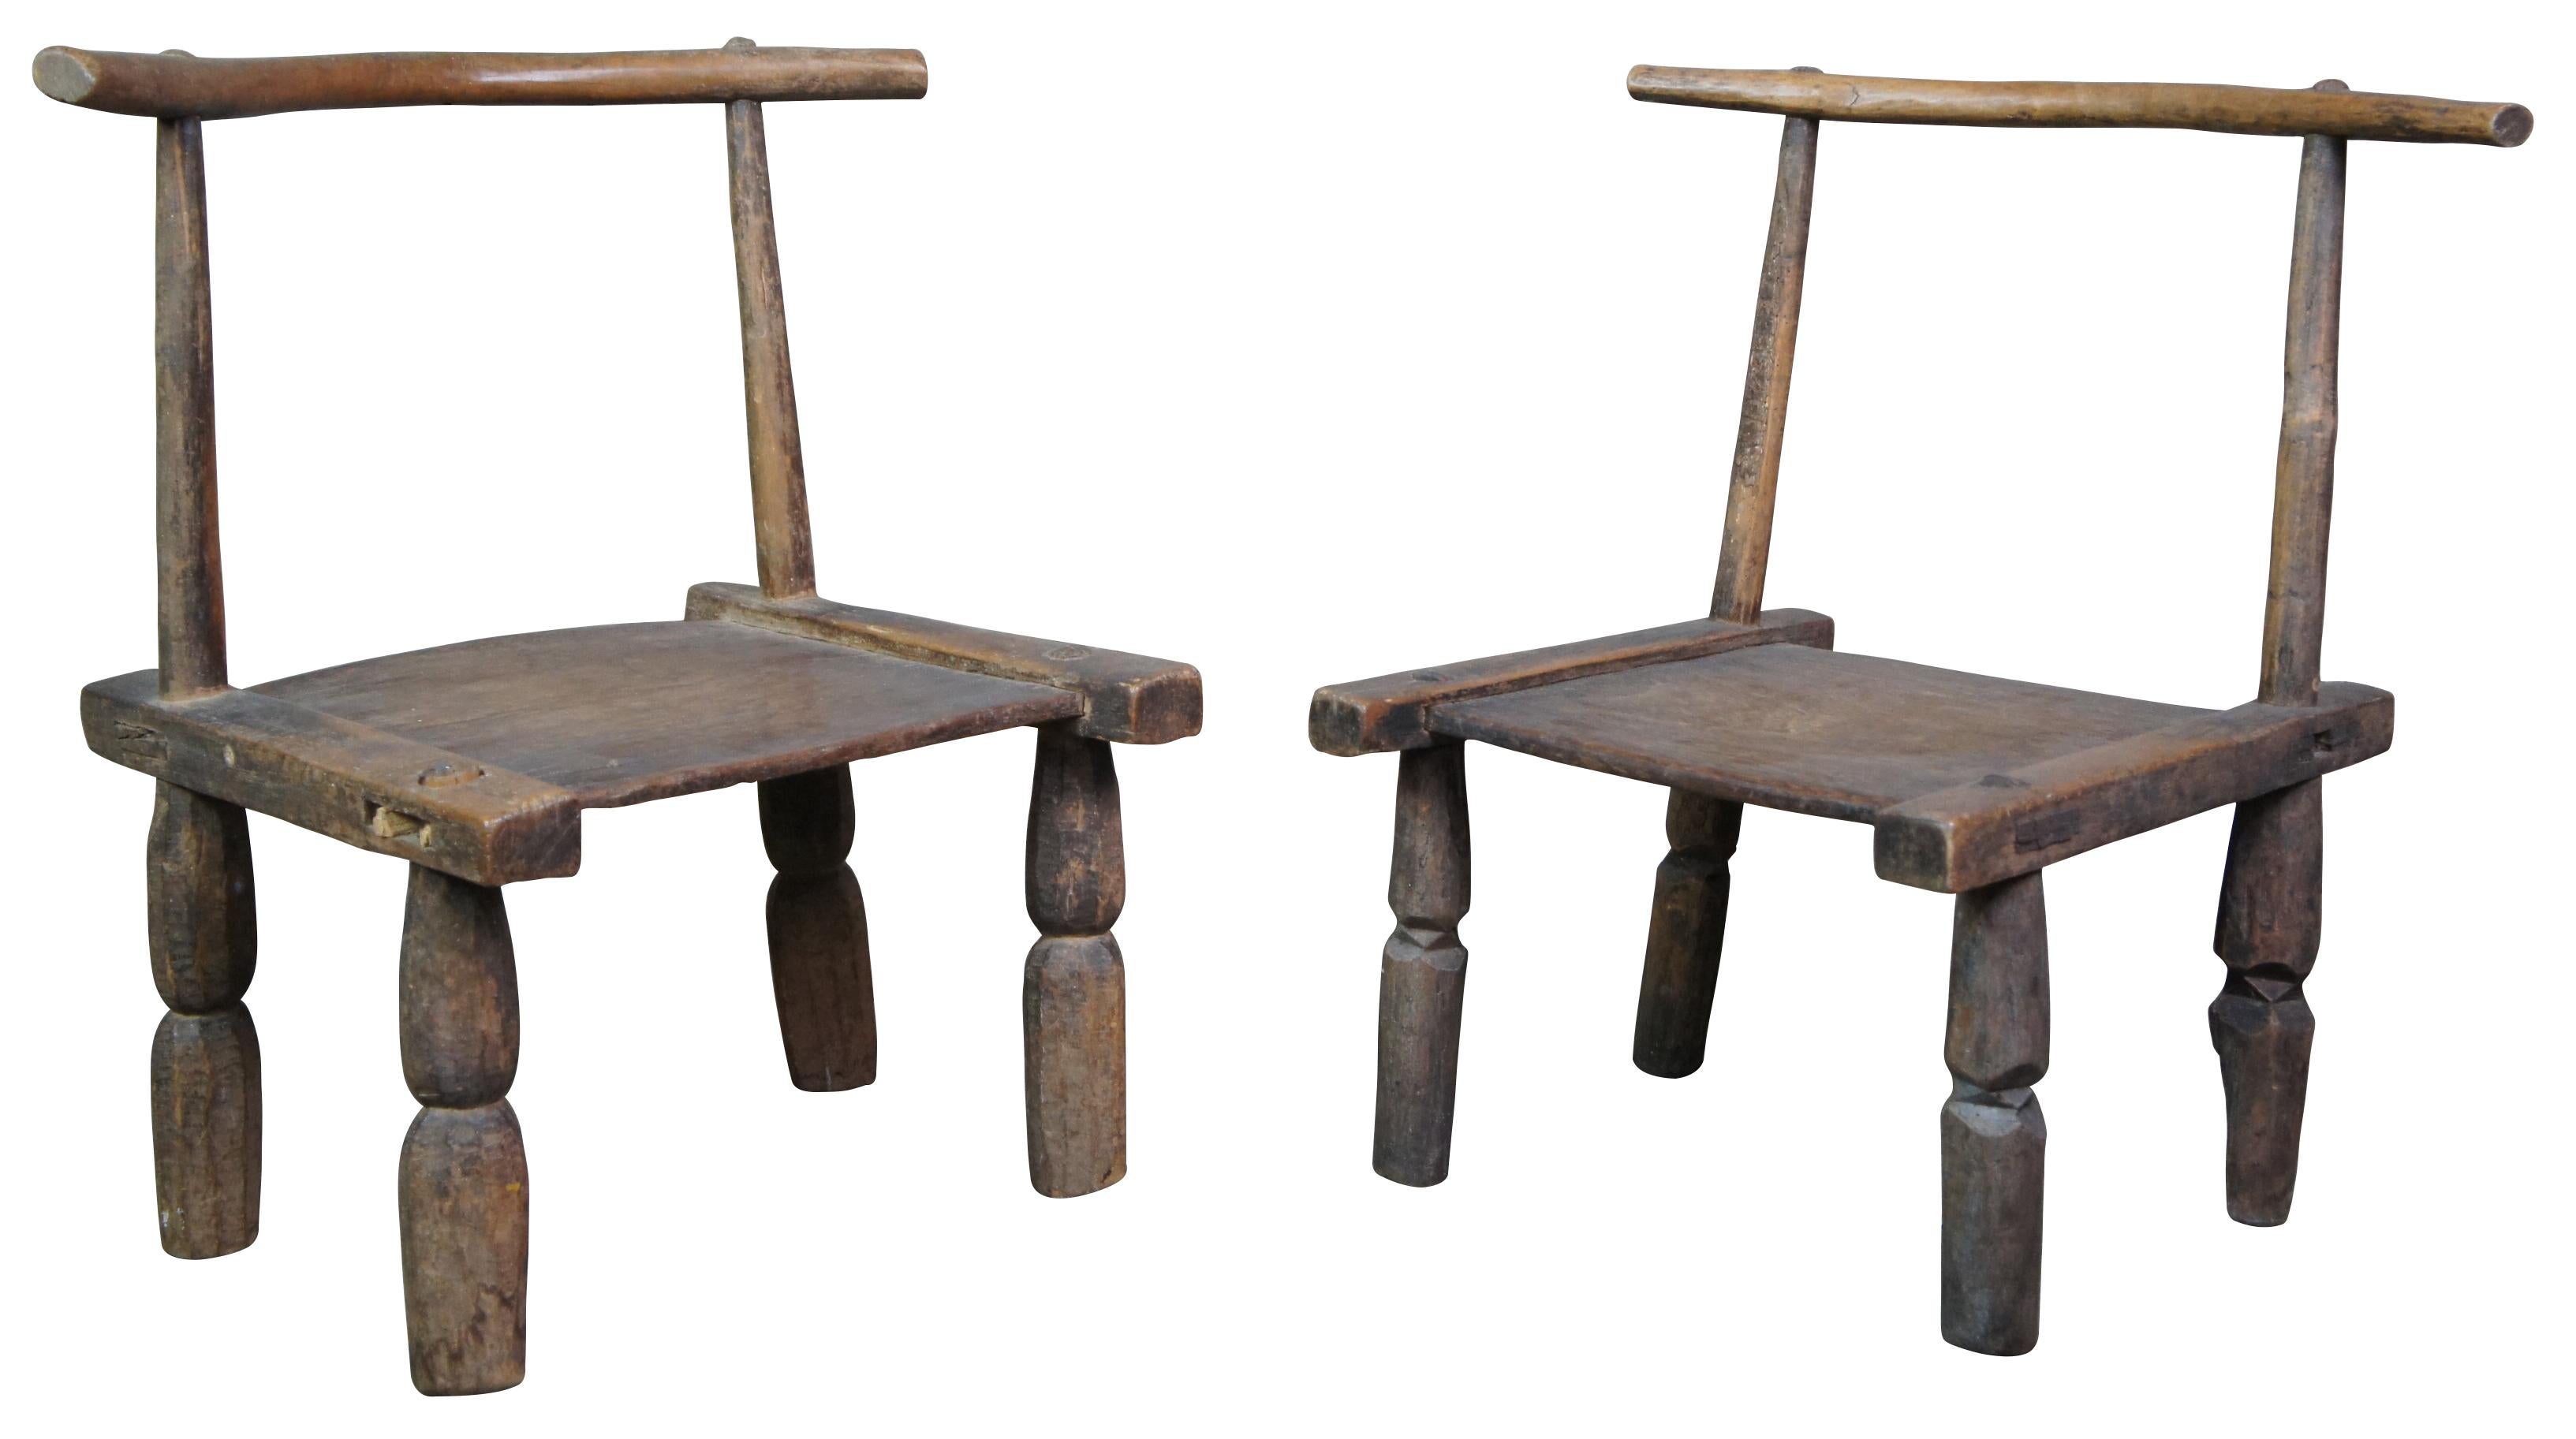 Two primitive carved African Baule chairs. Made from indigenous local woods featuring yoke back, short legs and flat seat.

These low chairs were carried on the shoulders of village men as they went to attend social gatherings or community